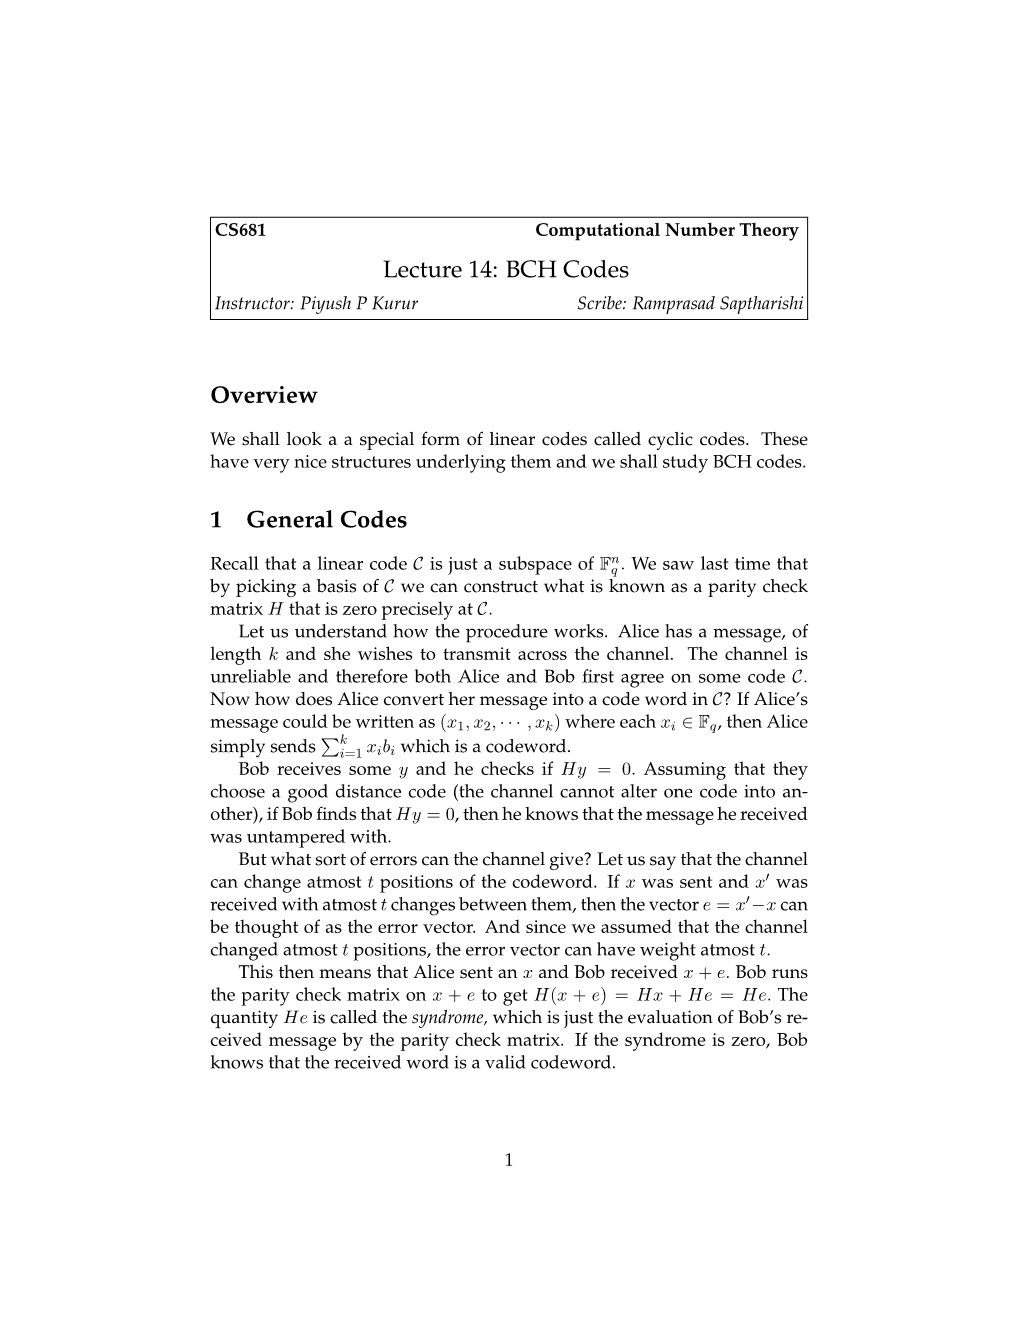 Lecture 14: BCH Codes Overview 1 General Codes